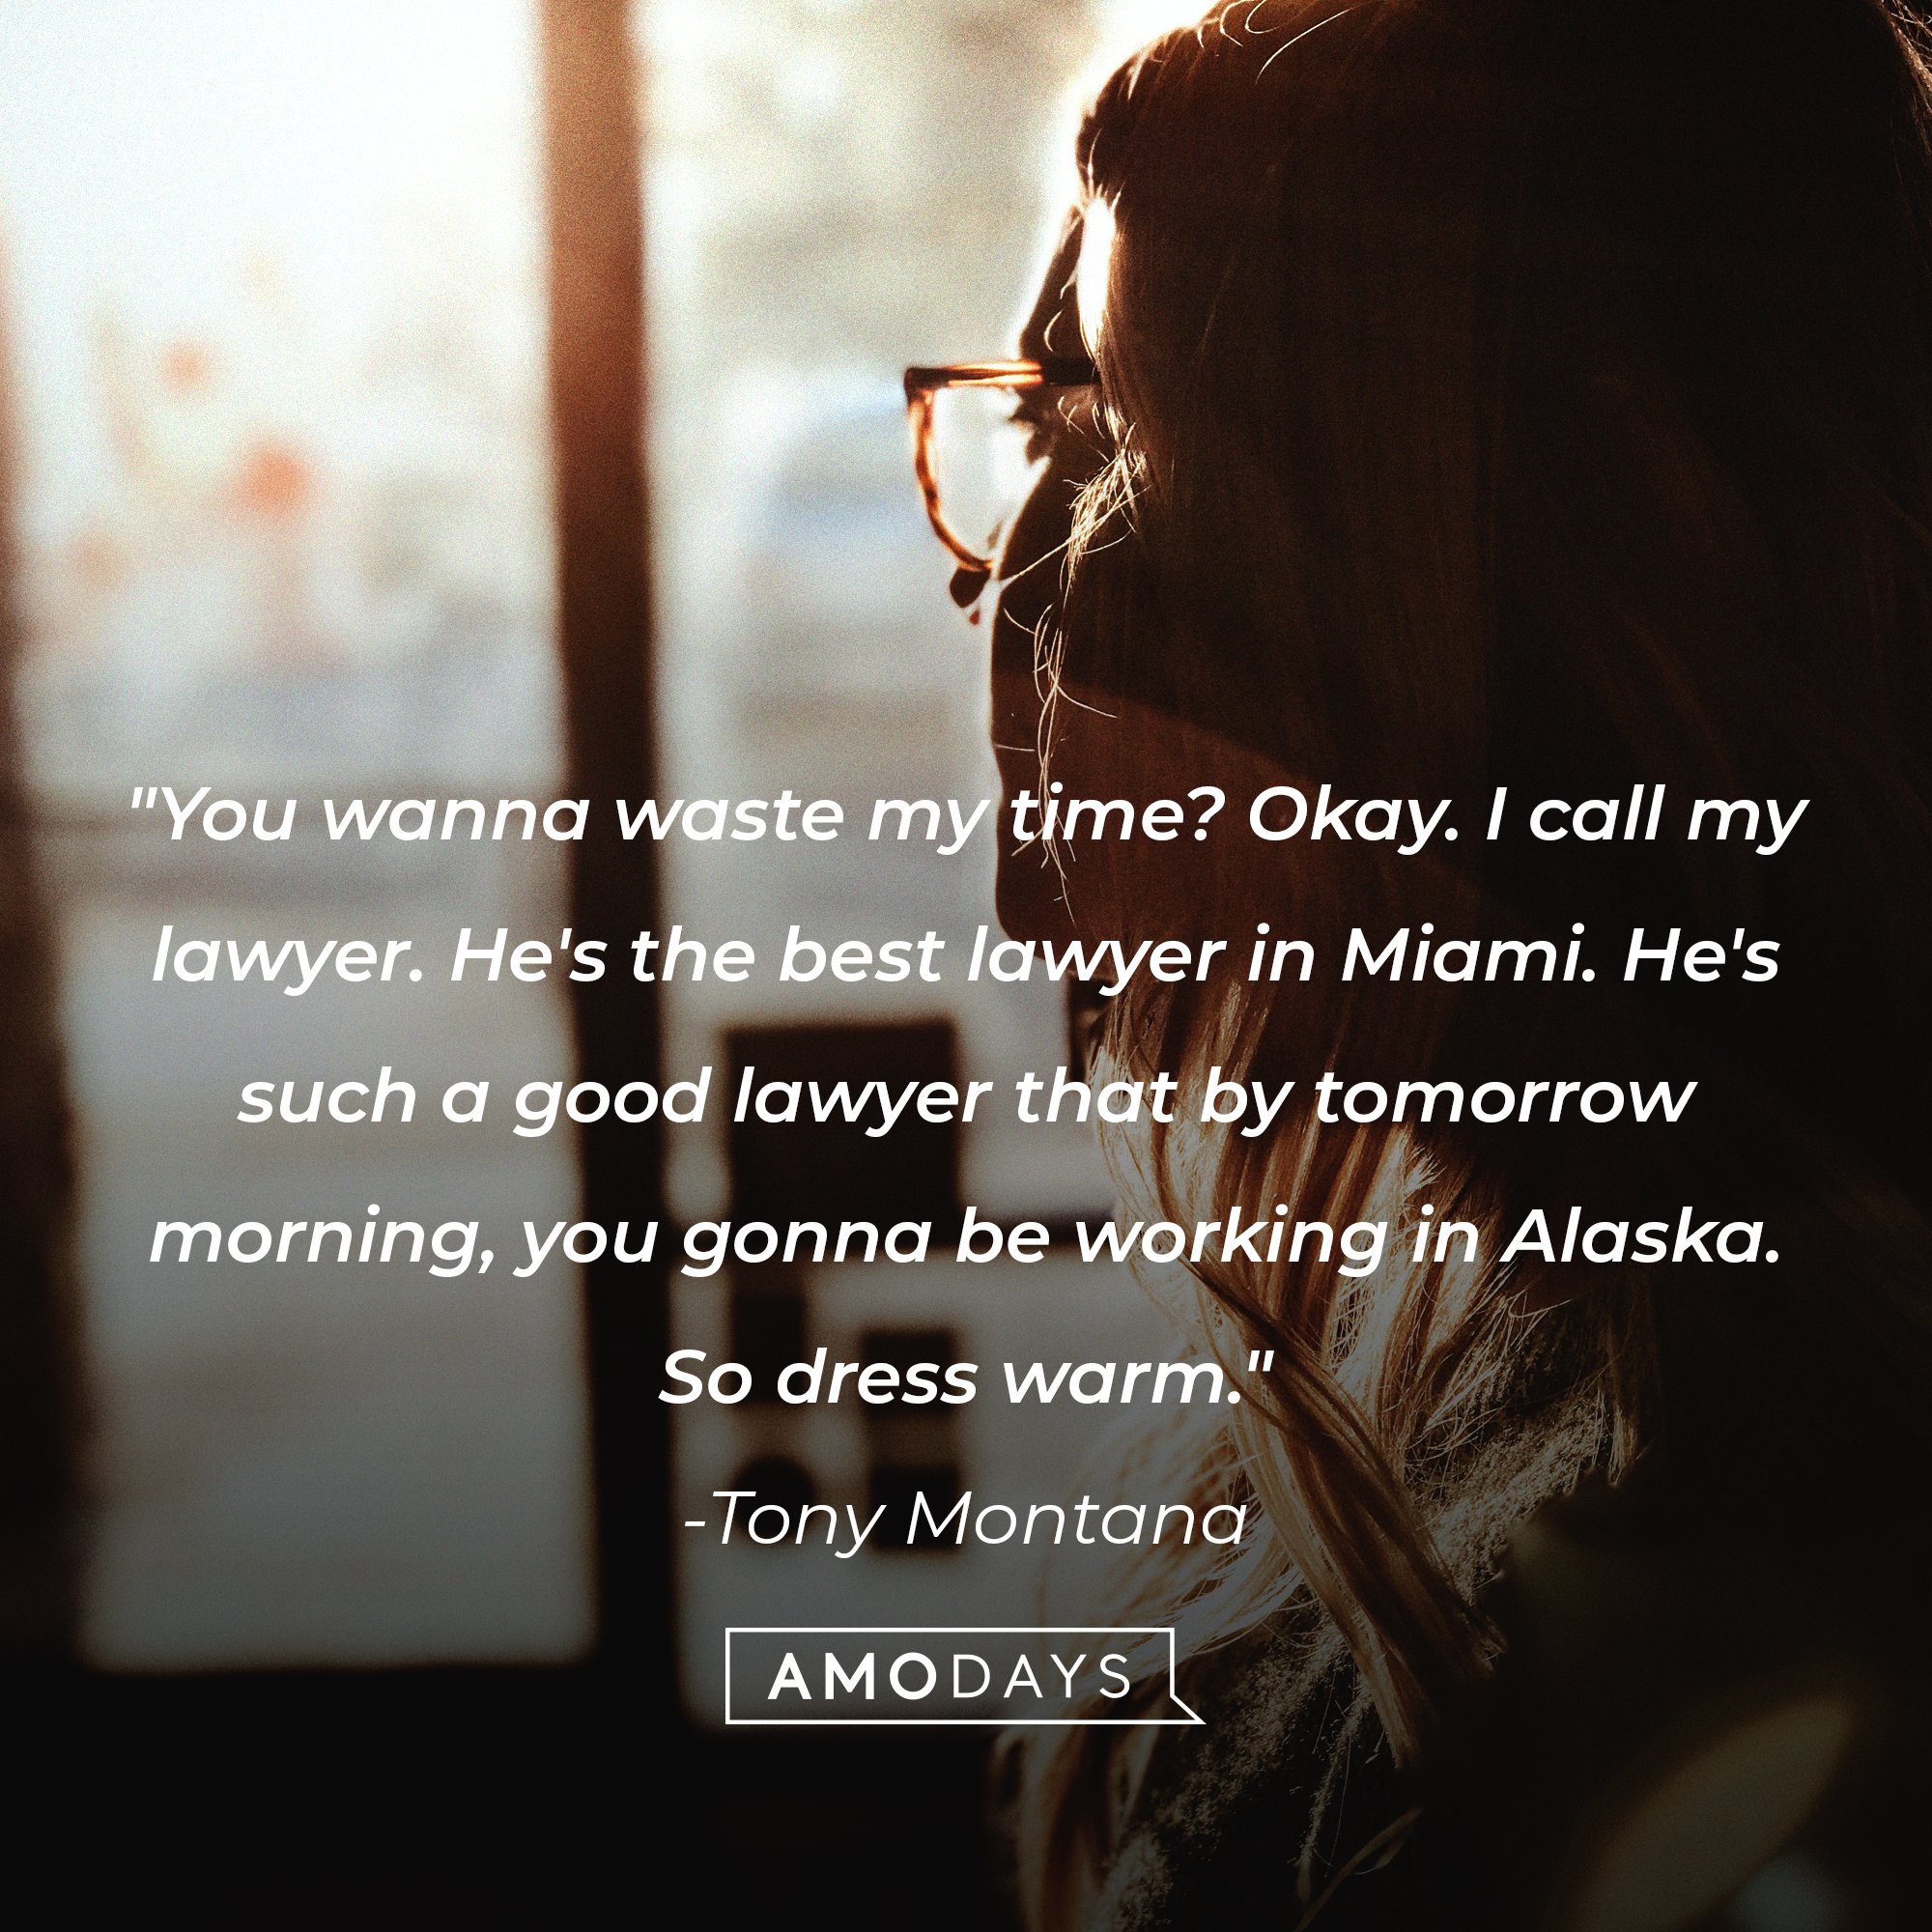   Tony Montana’s quote: "You wanna waste my time? Okay. I call my lawyer. He's the best lawyer in Miami. He's such a good lawyer that by tomorrow morning, you gonna be working in Alaska. So dress warm." | Image: AmoDays